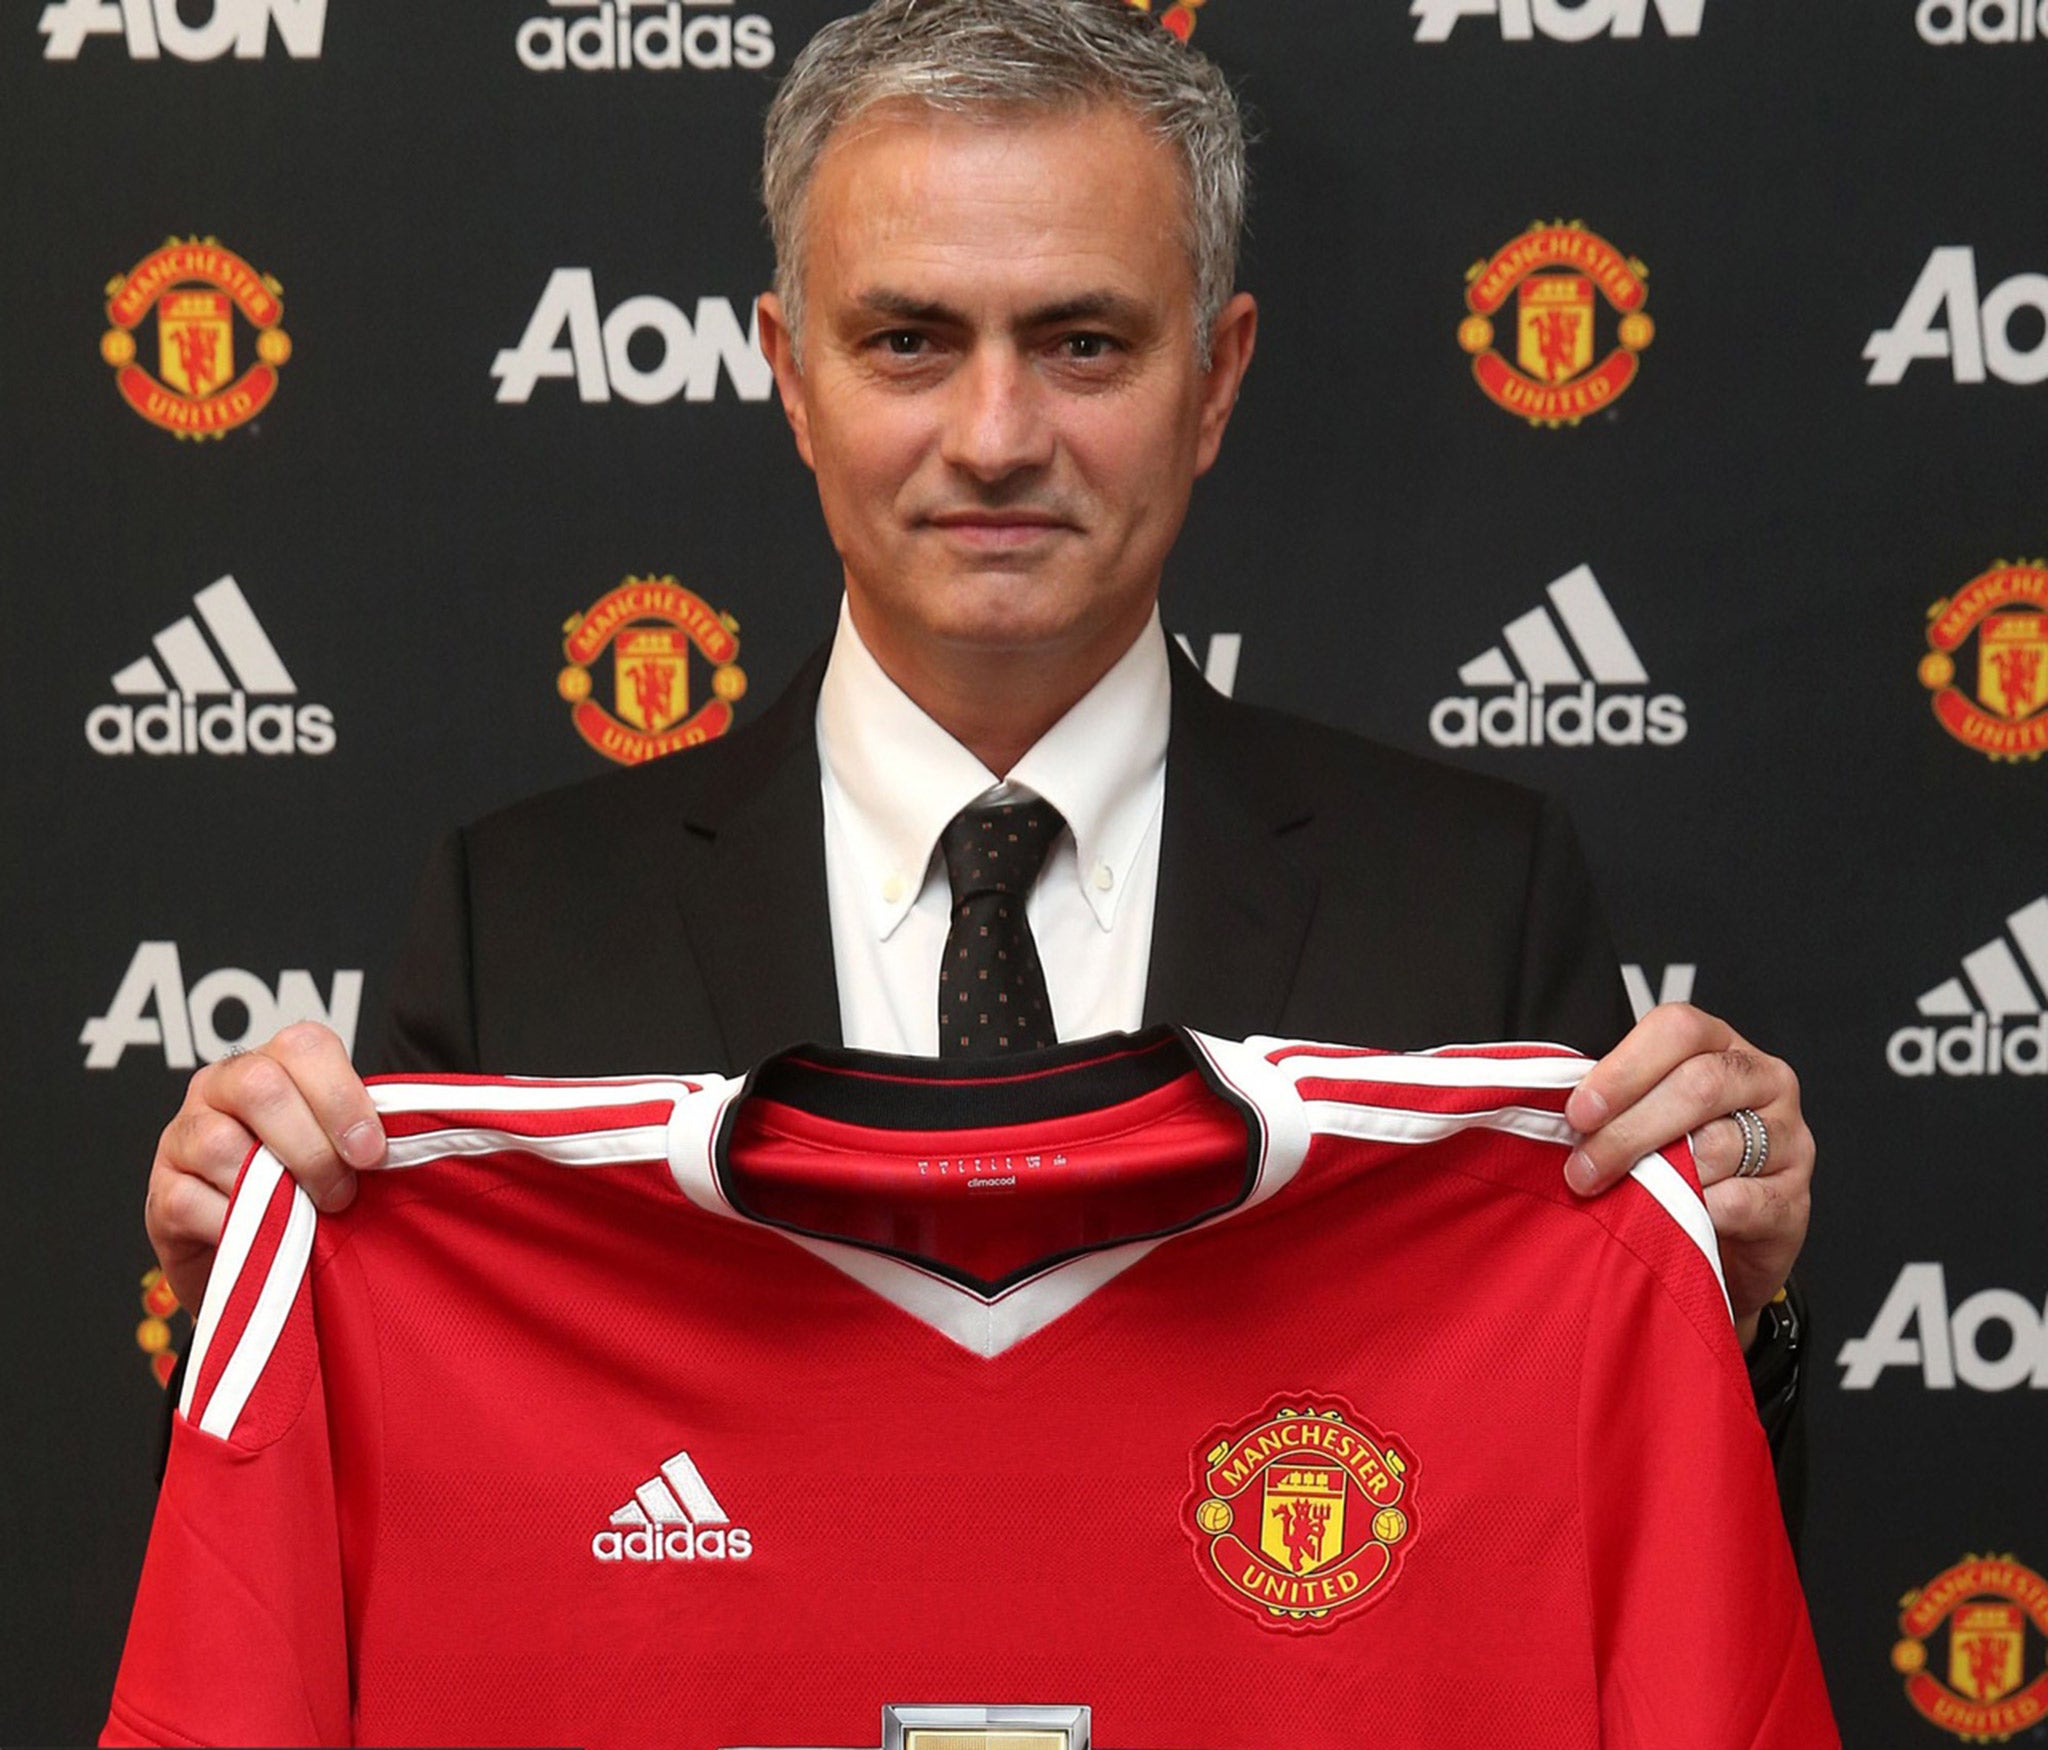 Jose Mourinho has been named Manchester United manager